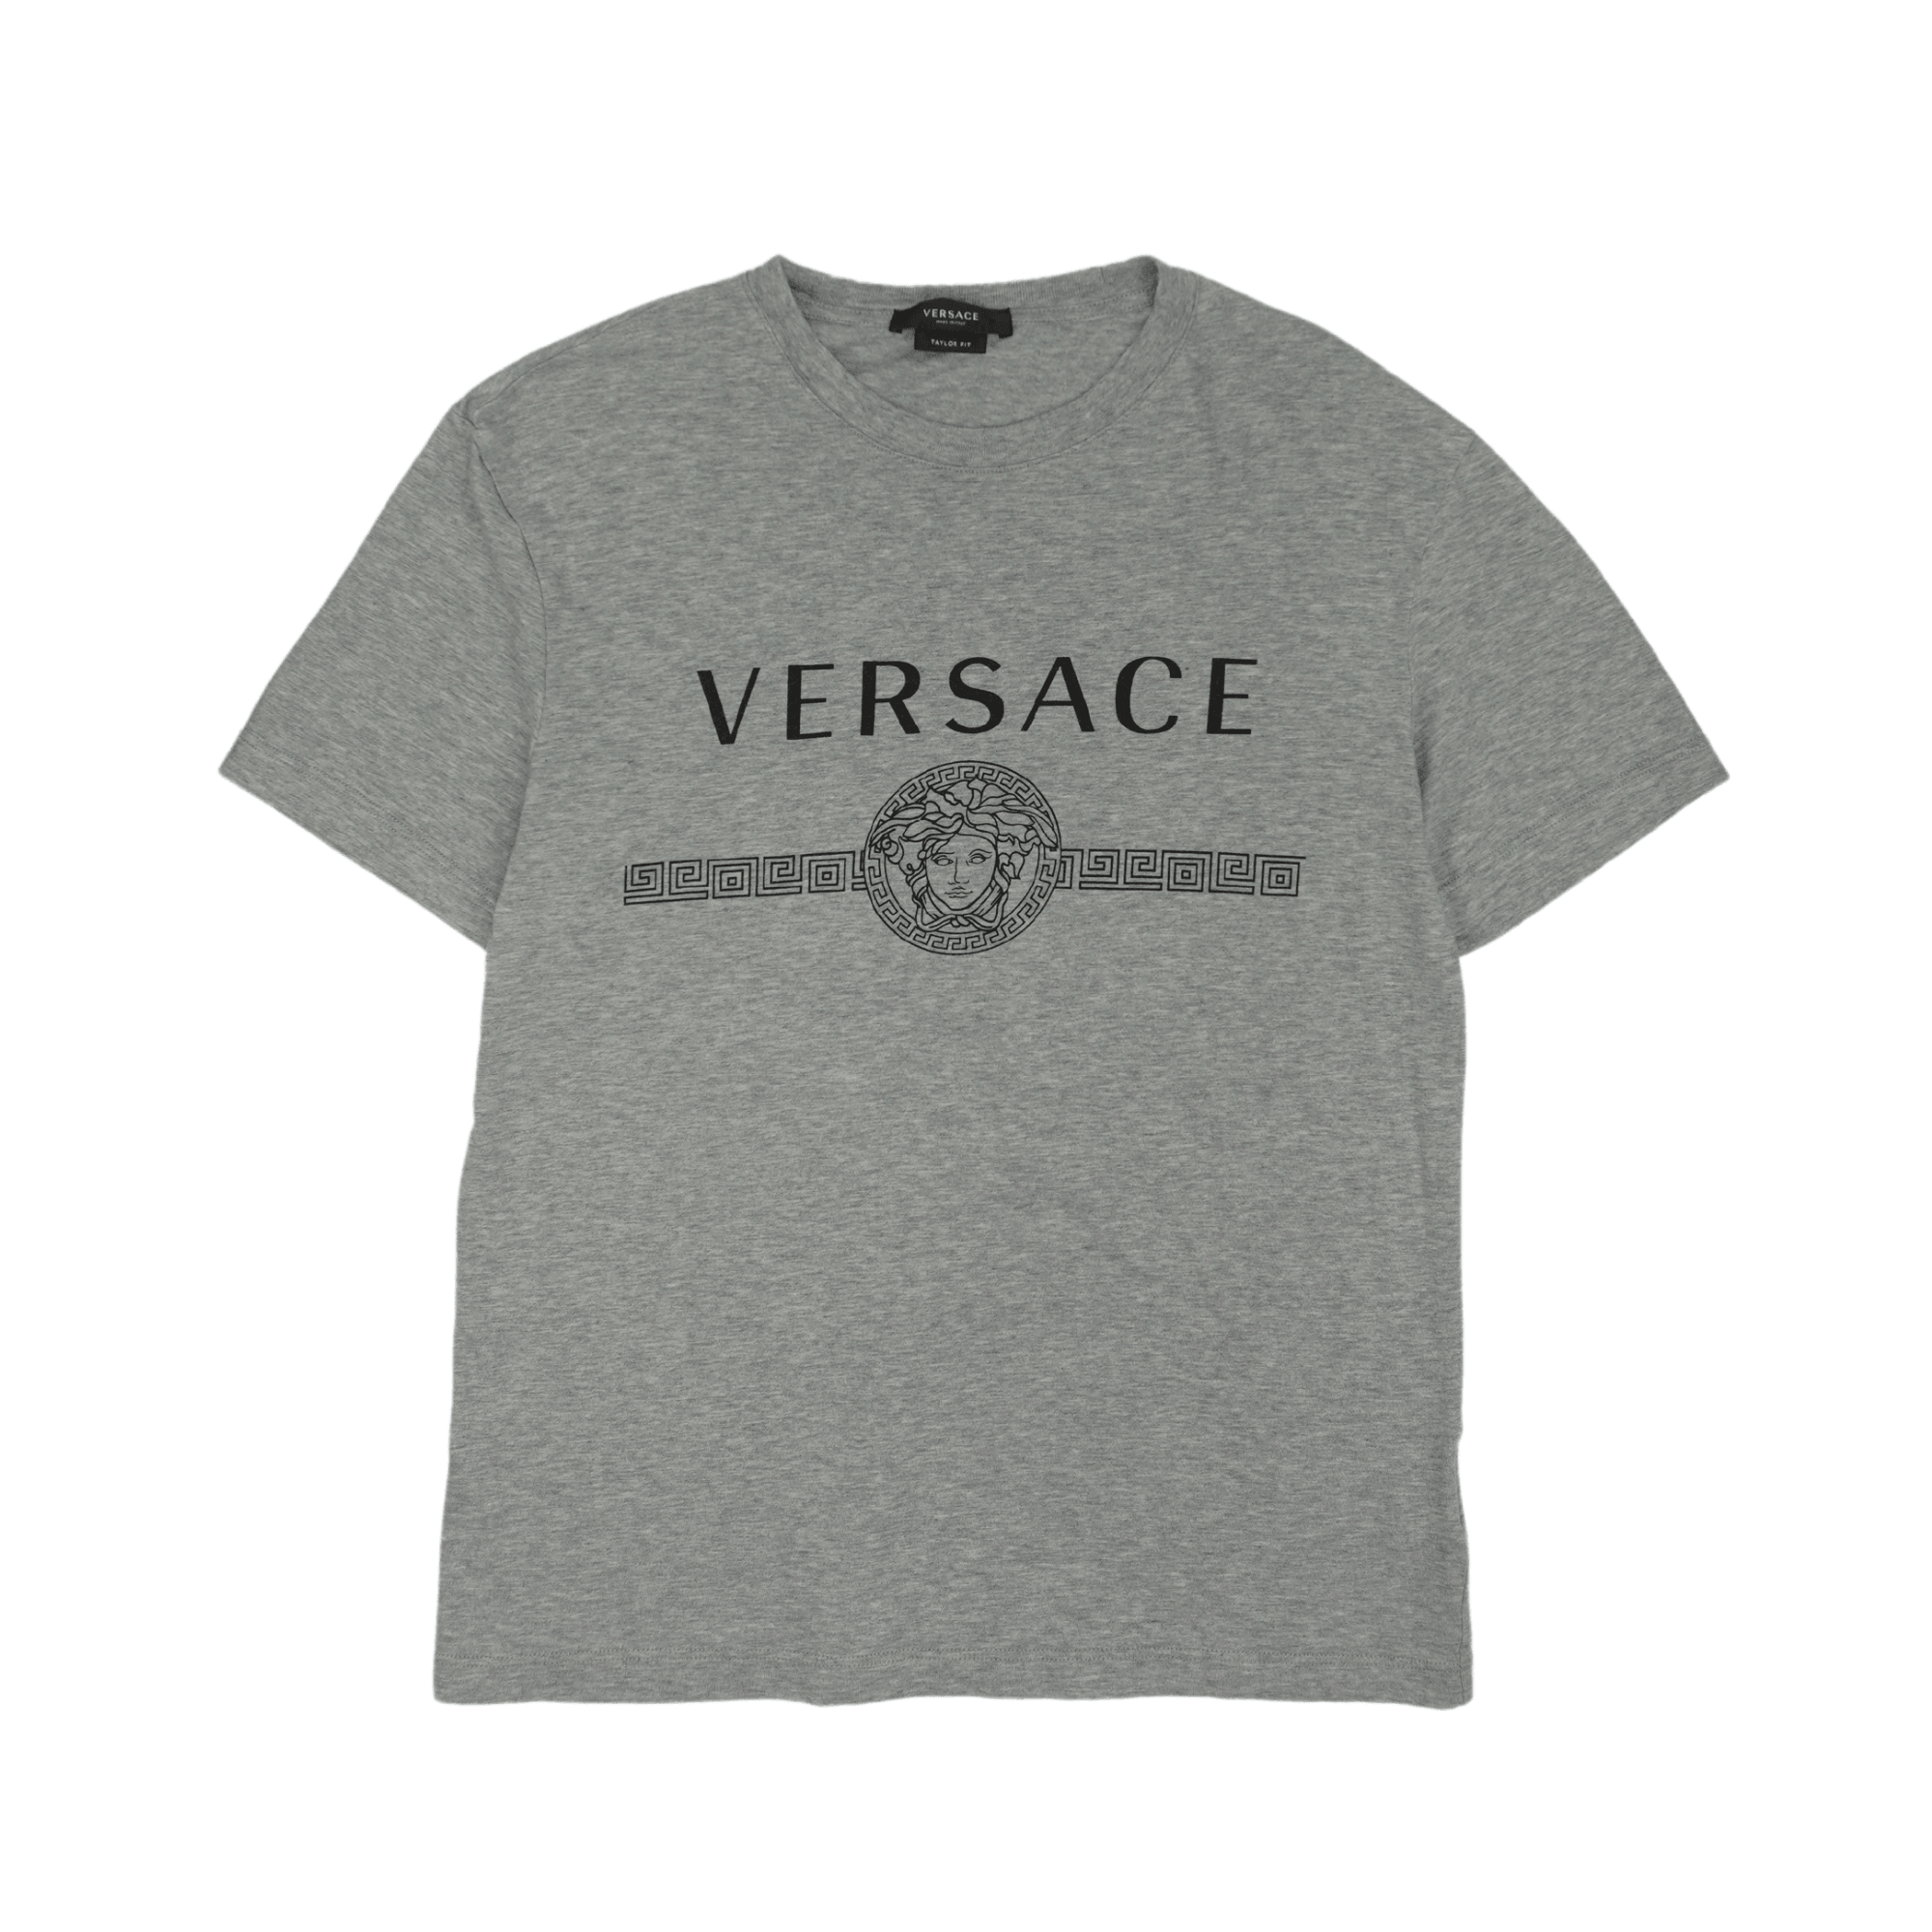 Versace T-Shirt - Men's M - Fashionably Yours